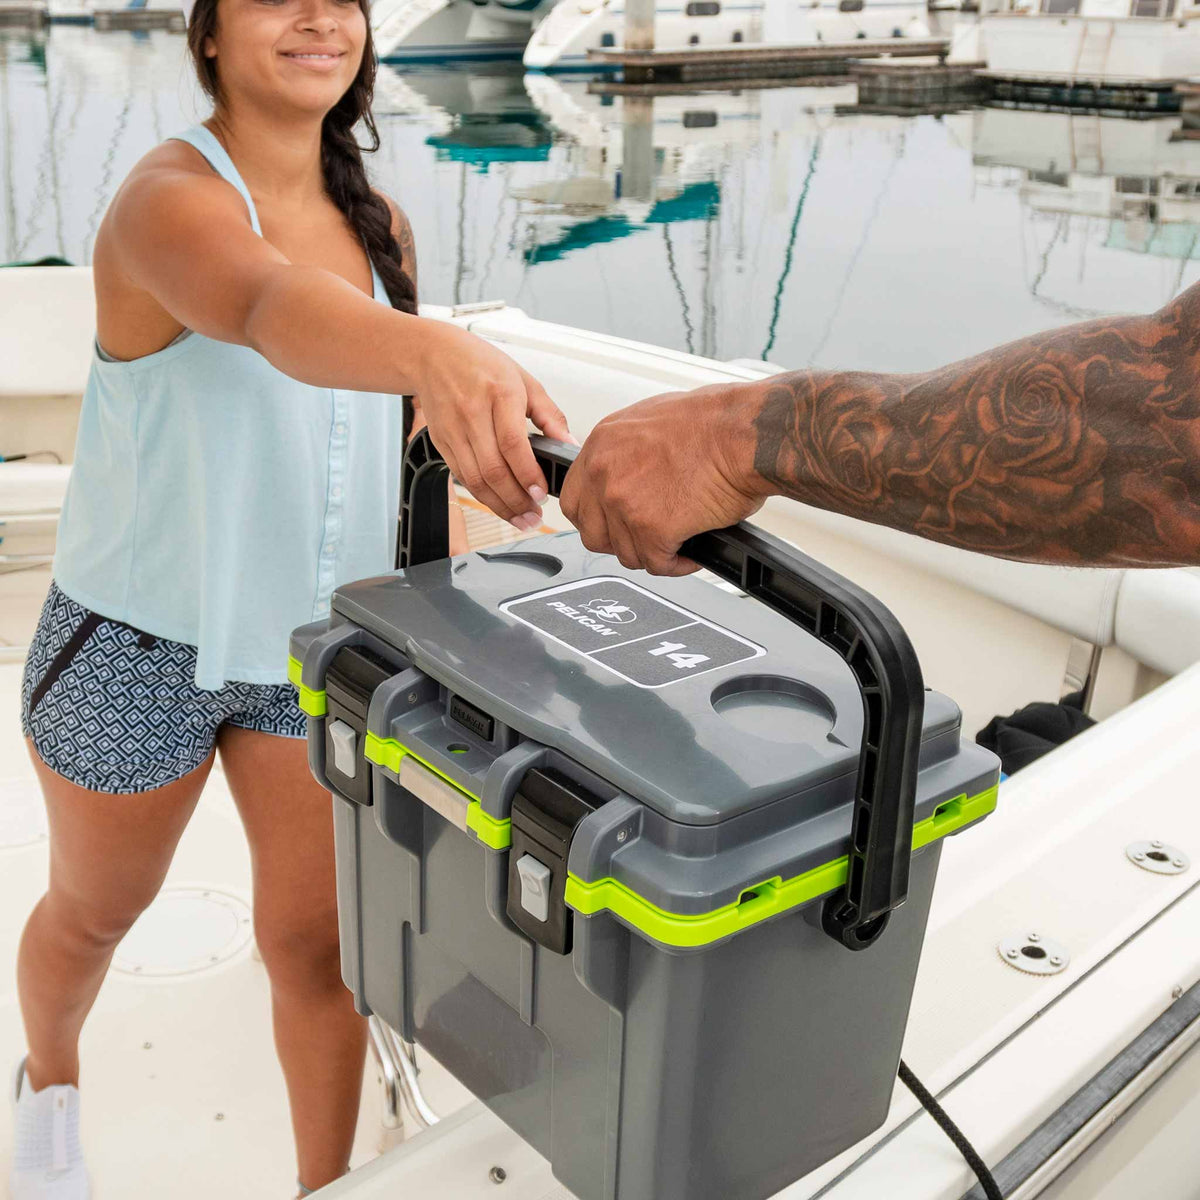 14QT Personal Pelican Cooler being passed to another person by using the retractable handle